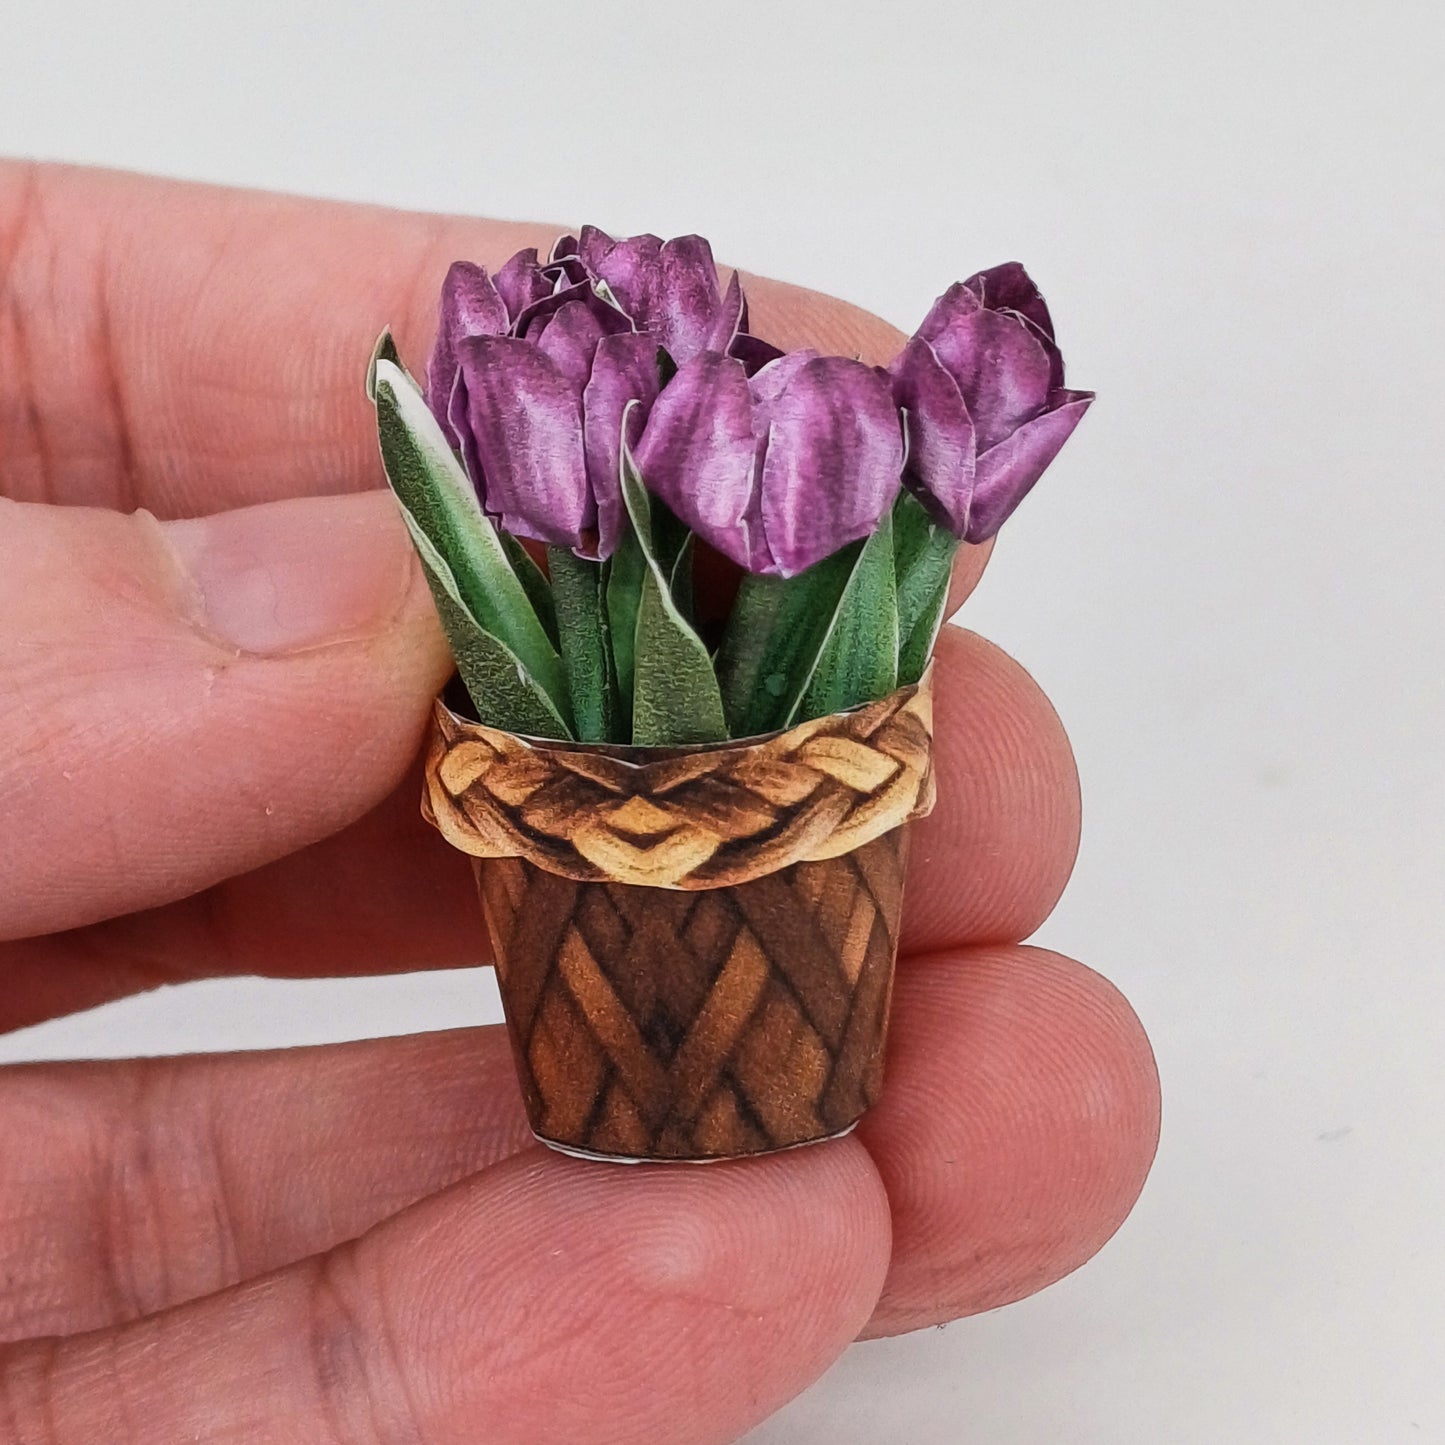 Miniature 1:12 scale tulips for printing and handicrafts